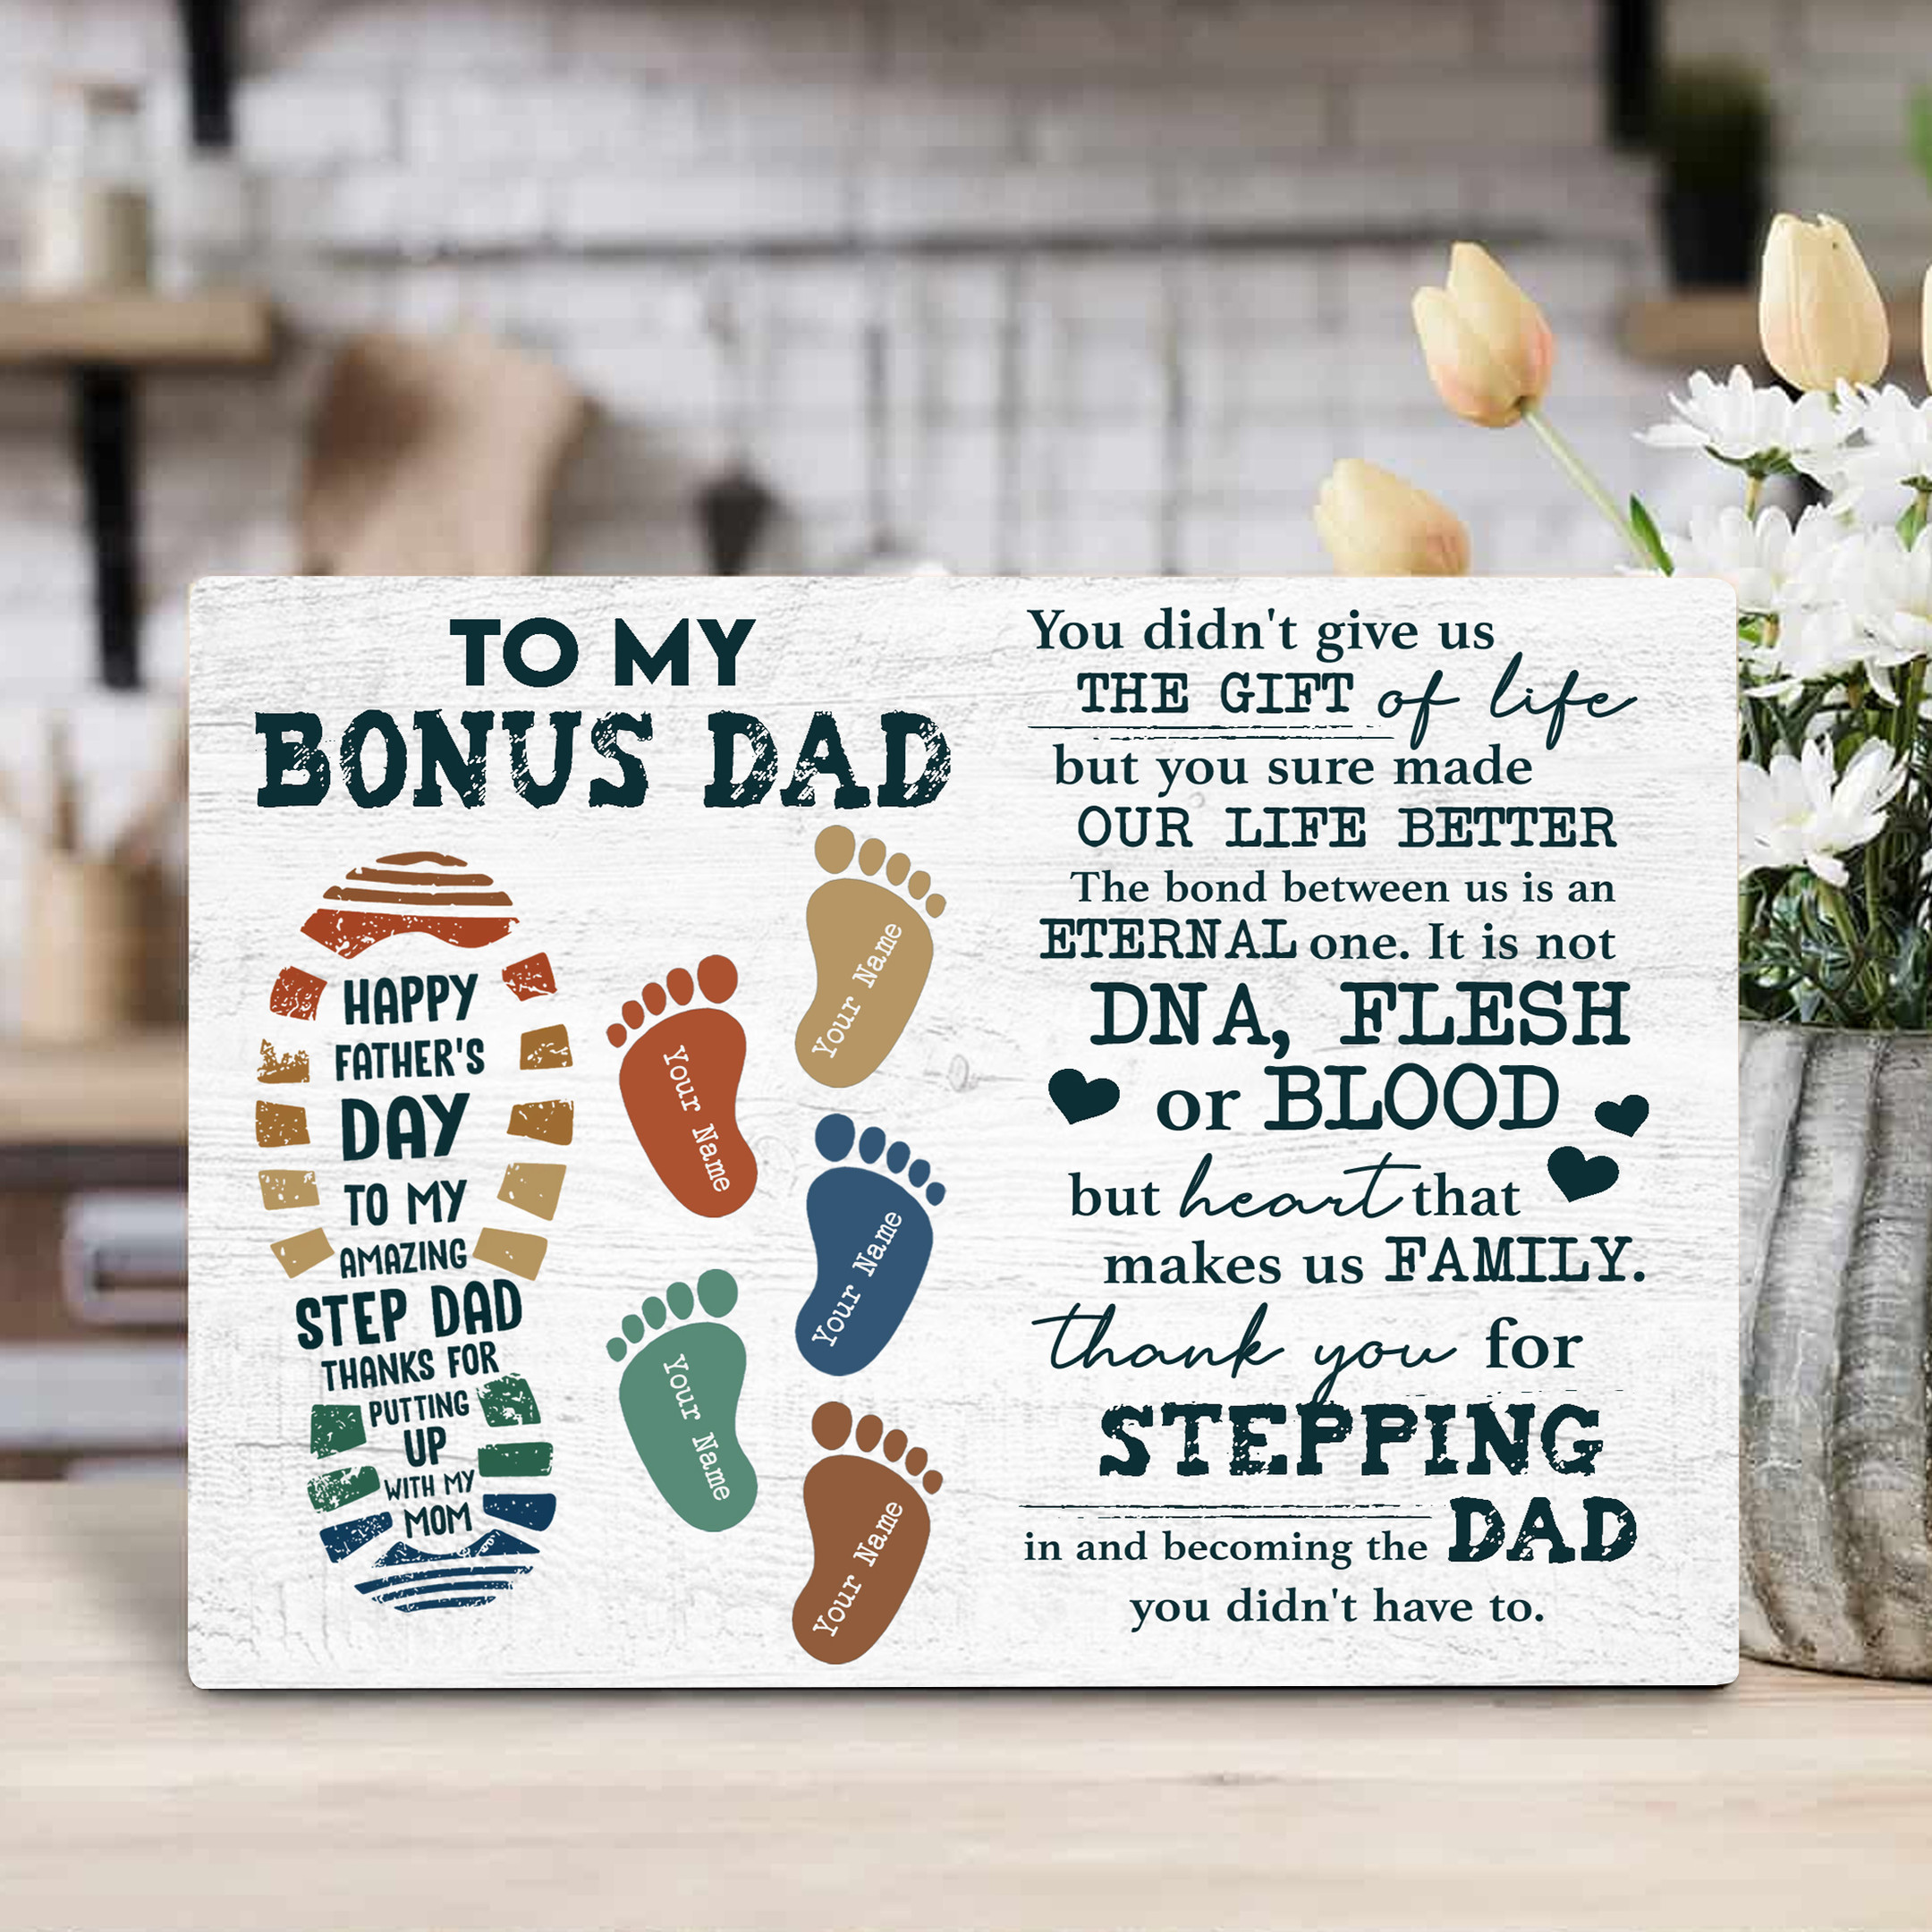 Personalized Gift For Bonus Dad Thank You Foot Print Desktop Plaque